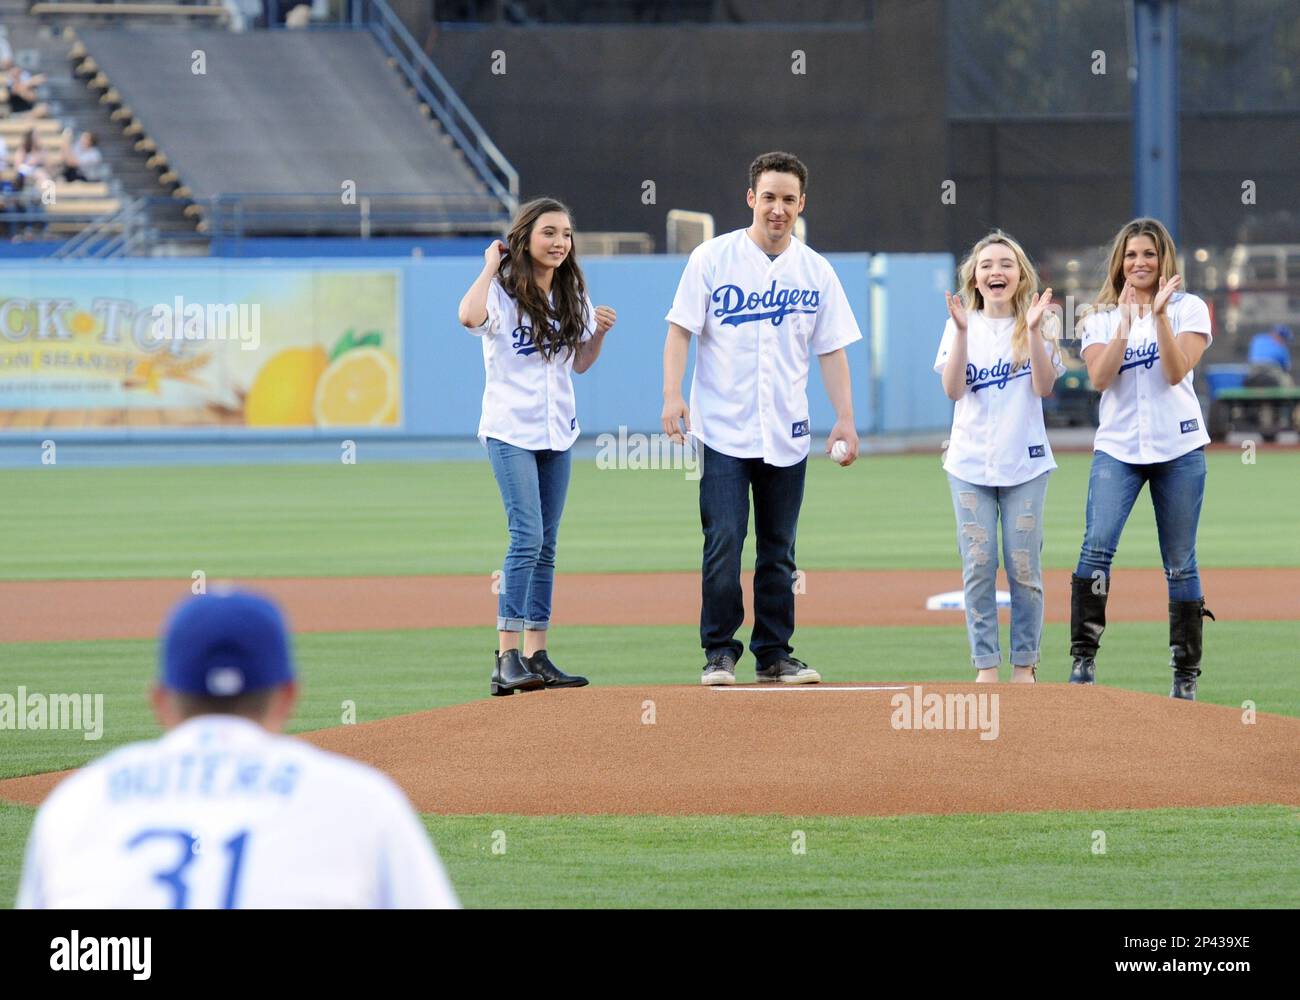 18 June 2014: Danielle Fishel, star of Disney television show Girl Meets  World prior to a Major League Baseball game between the Colorado Rockies  and the Los Angeles Dodgers at Dodger Stadium